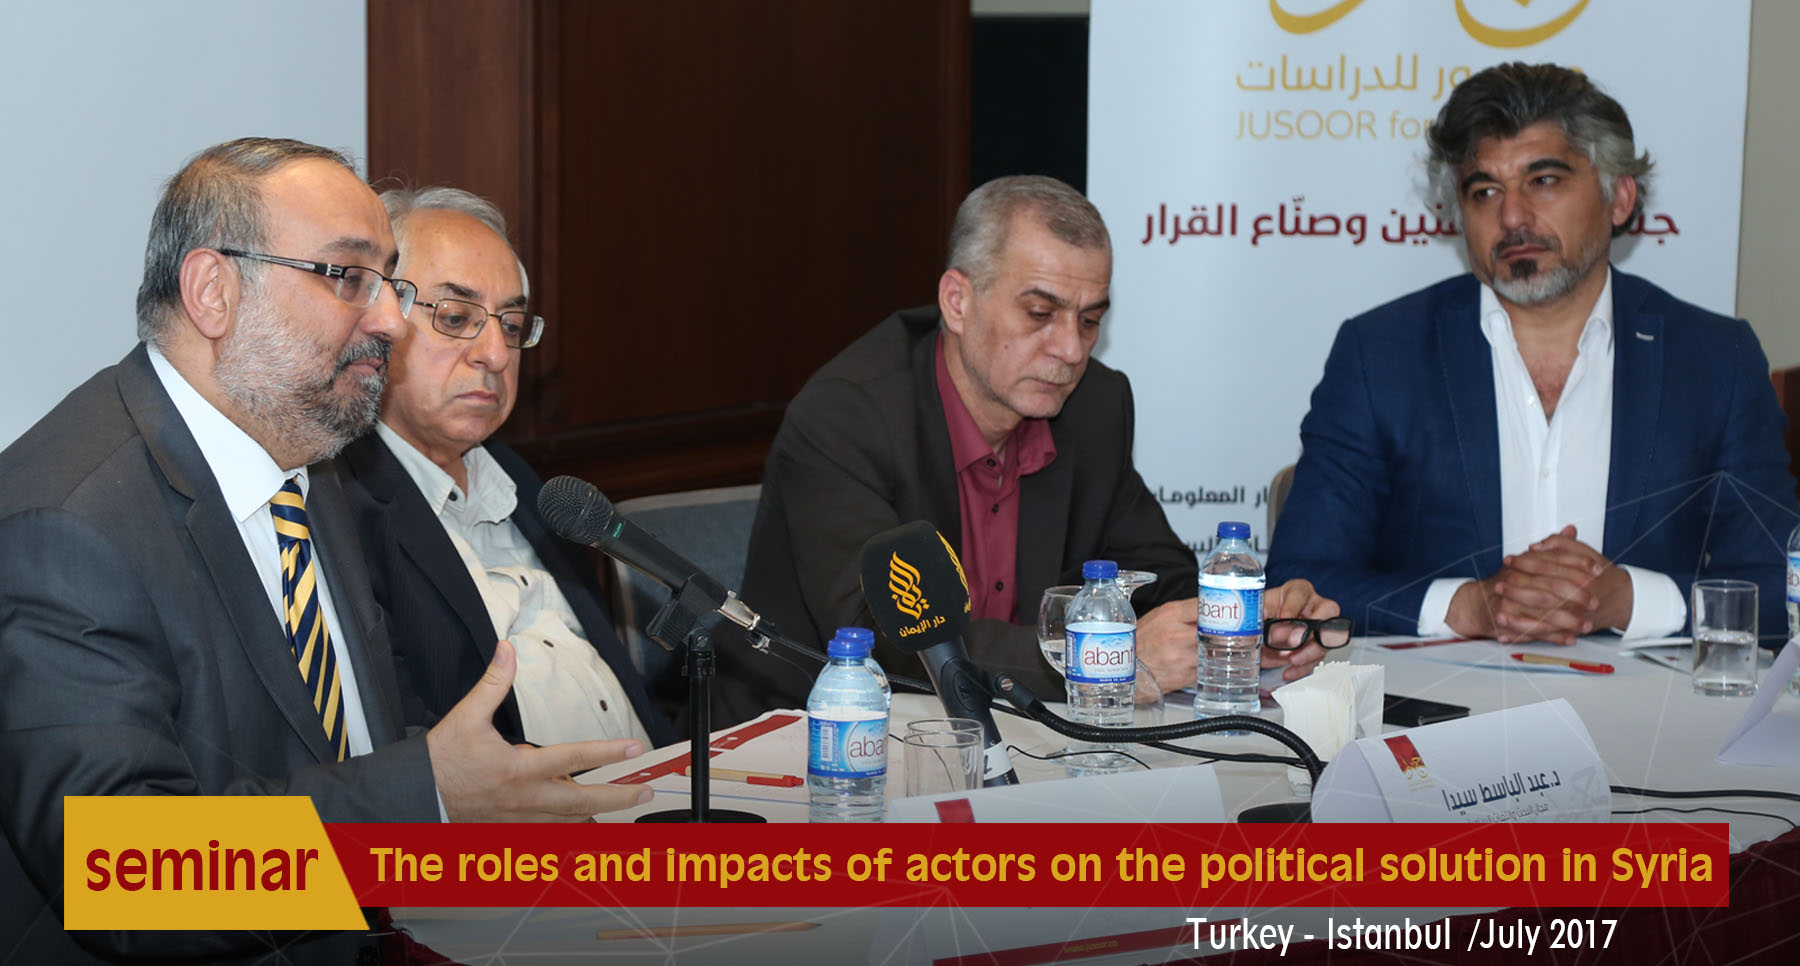 The roles and impacts of actors on the political solution in Syria